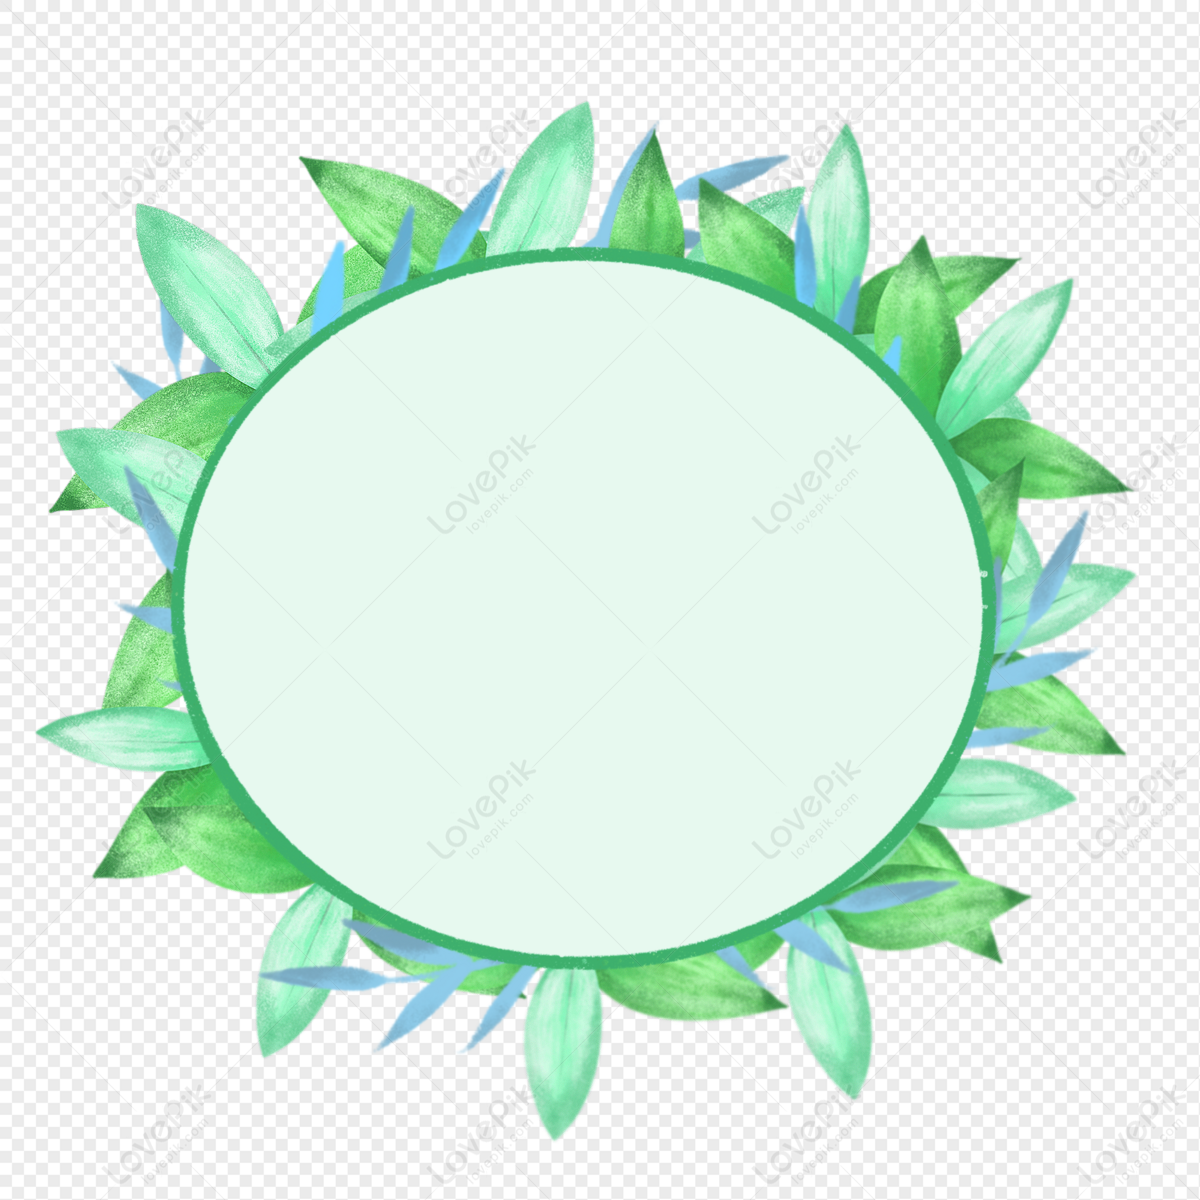 Summer Watercolor Plant Leaves Border PNG Picture And Clipart Image For ...